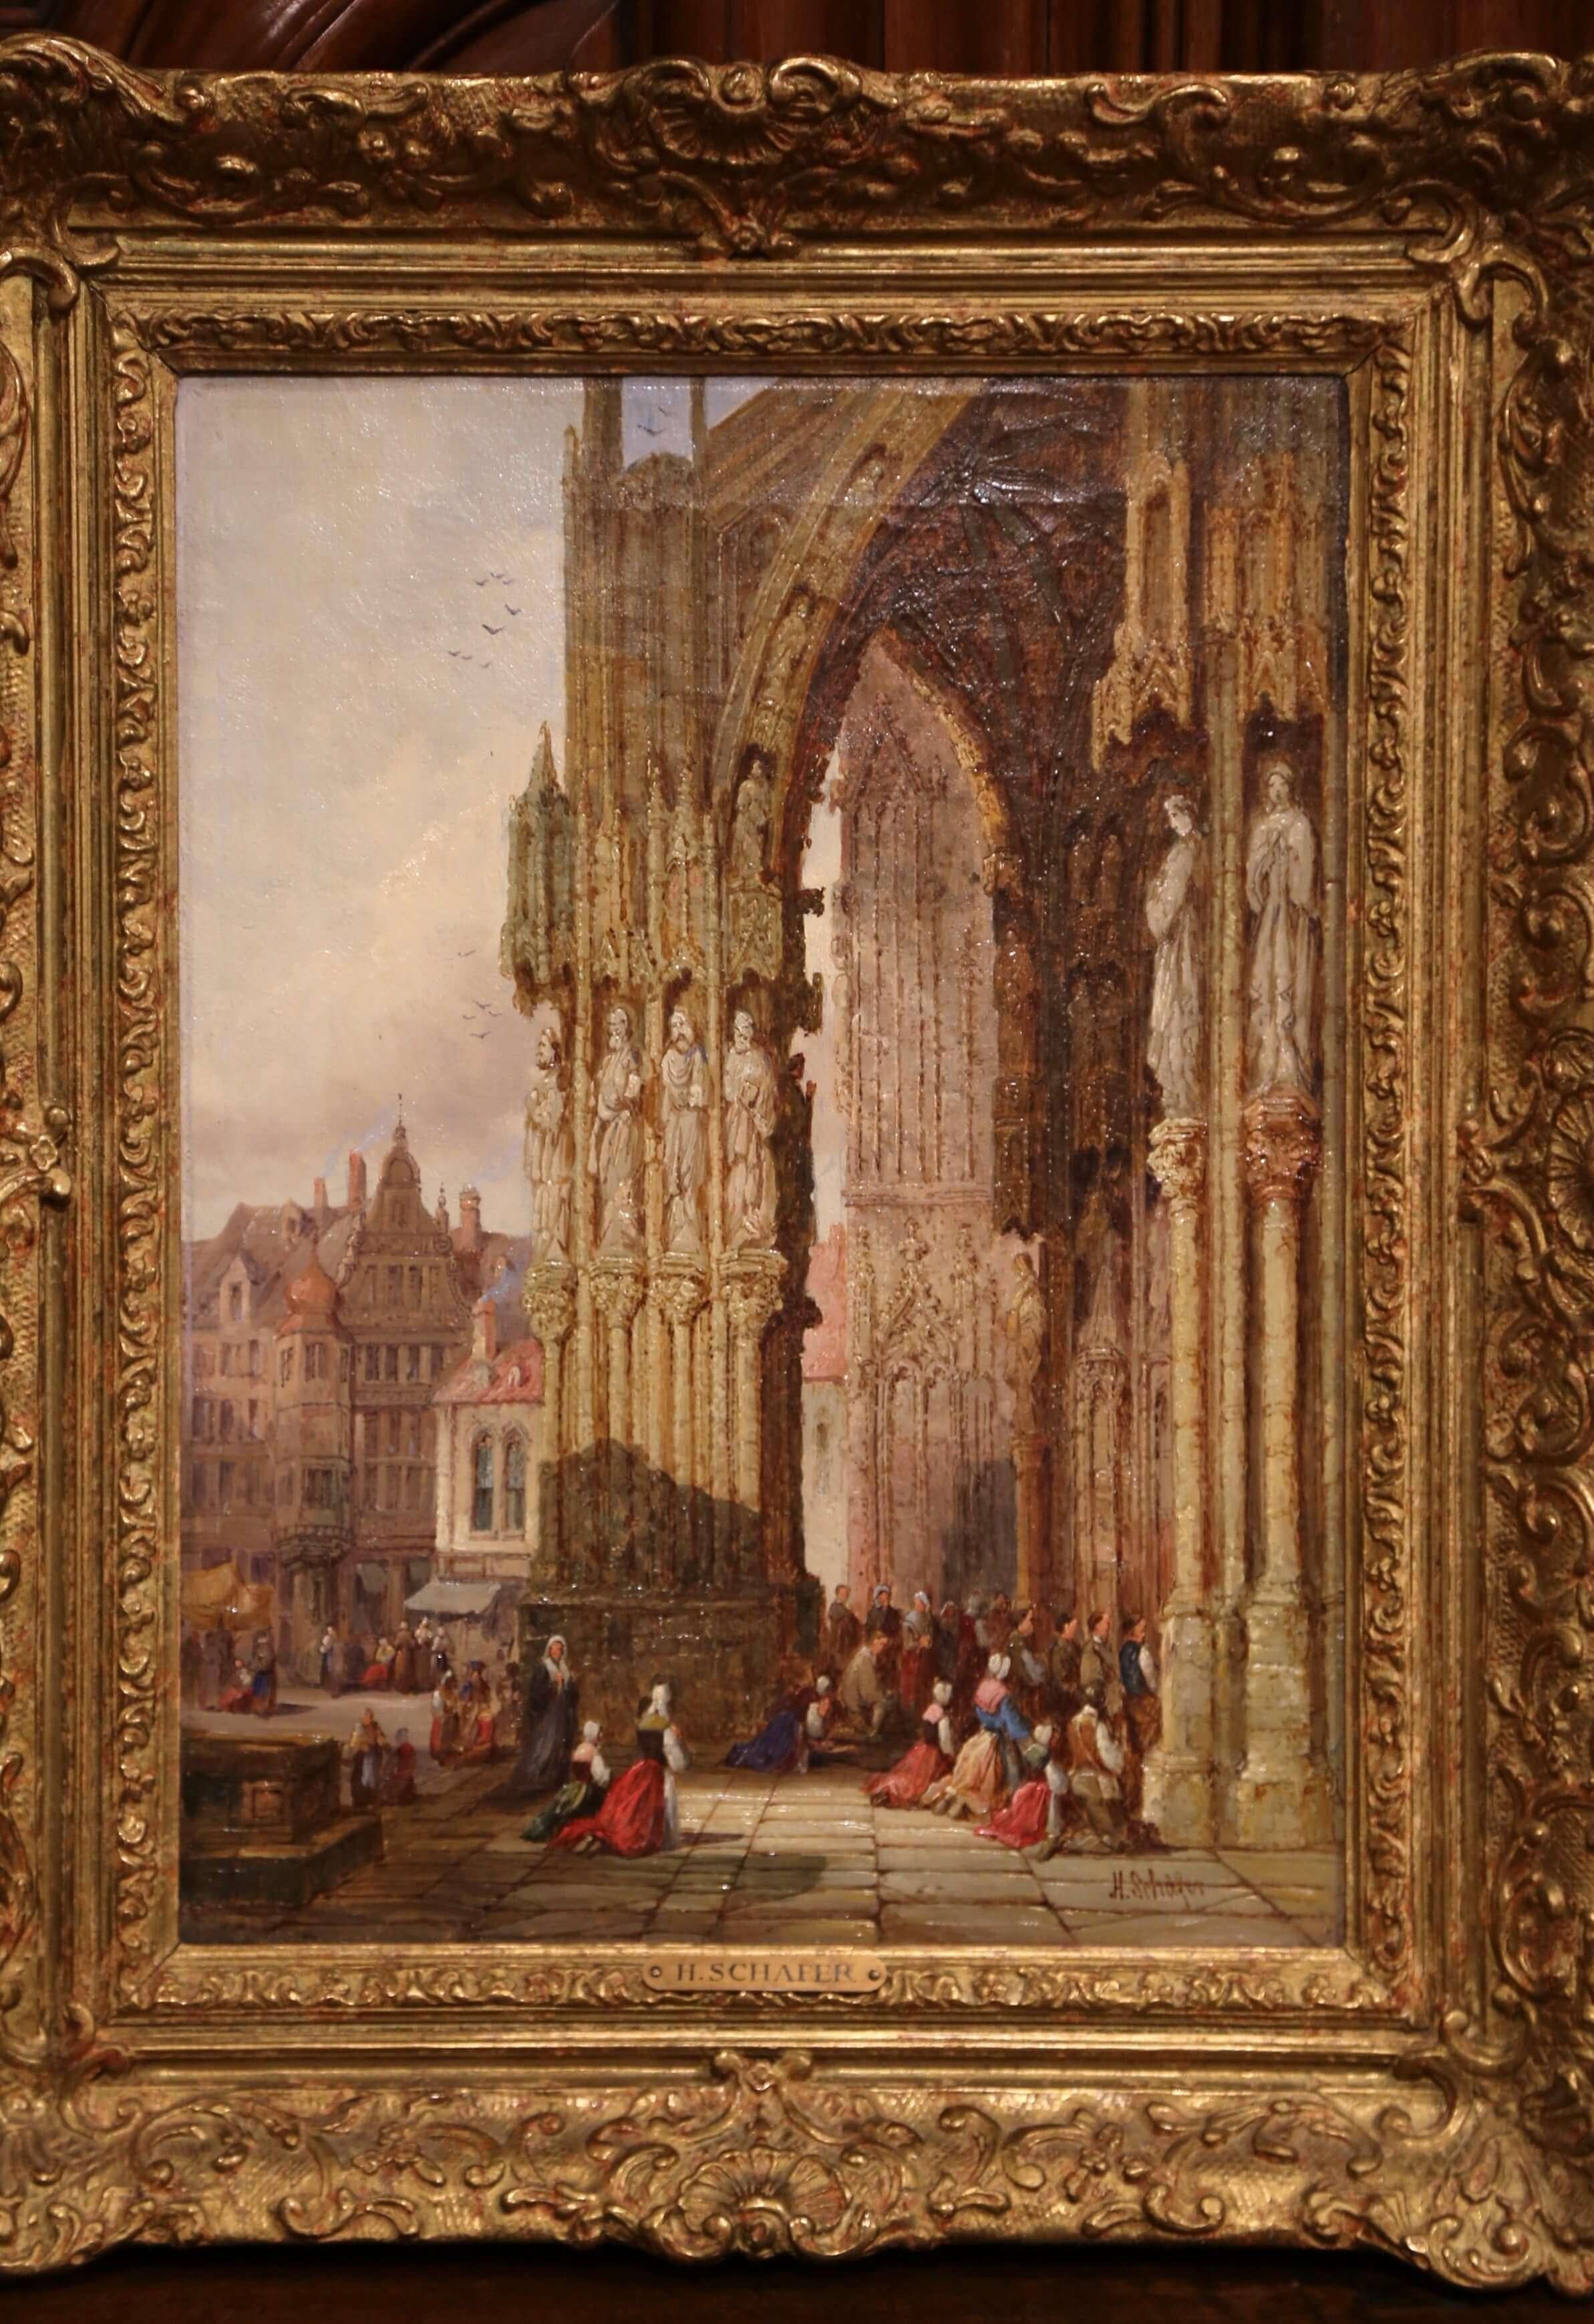 English Pair of 19th Century Framed Street Scenes Oil Paintings Signed Henry T. Schafer